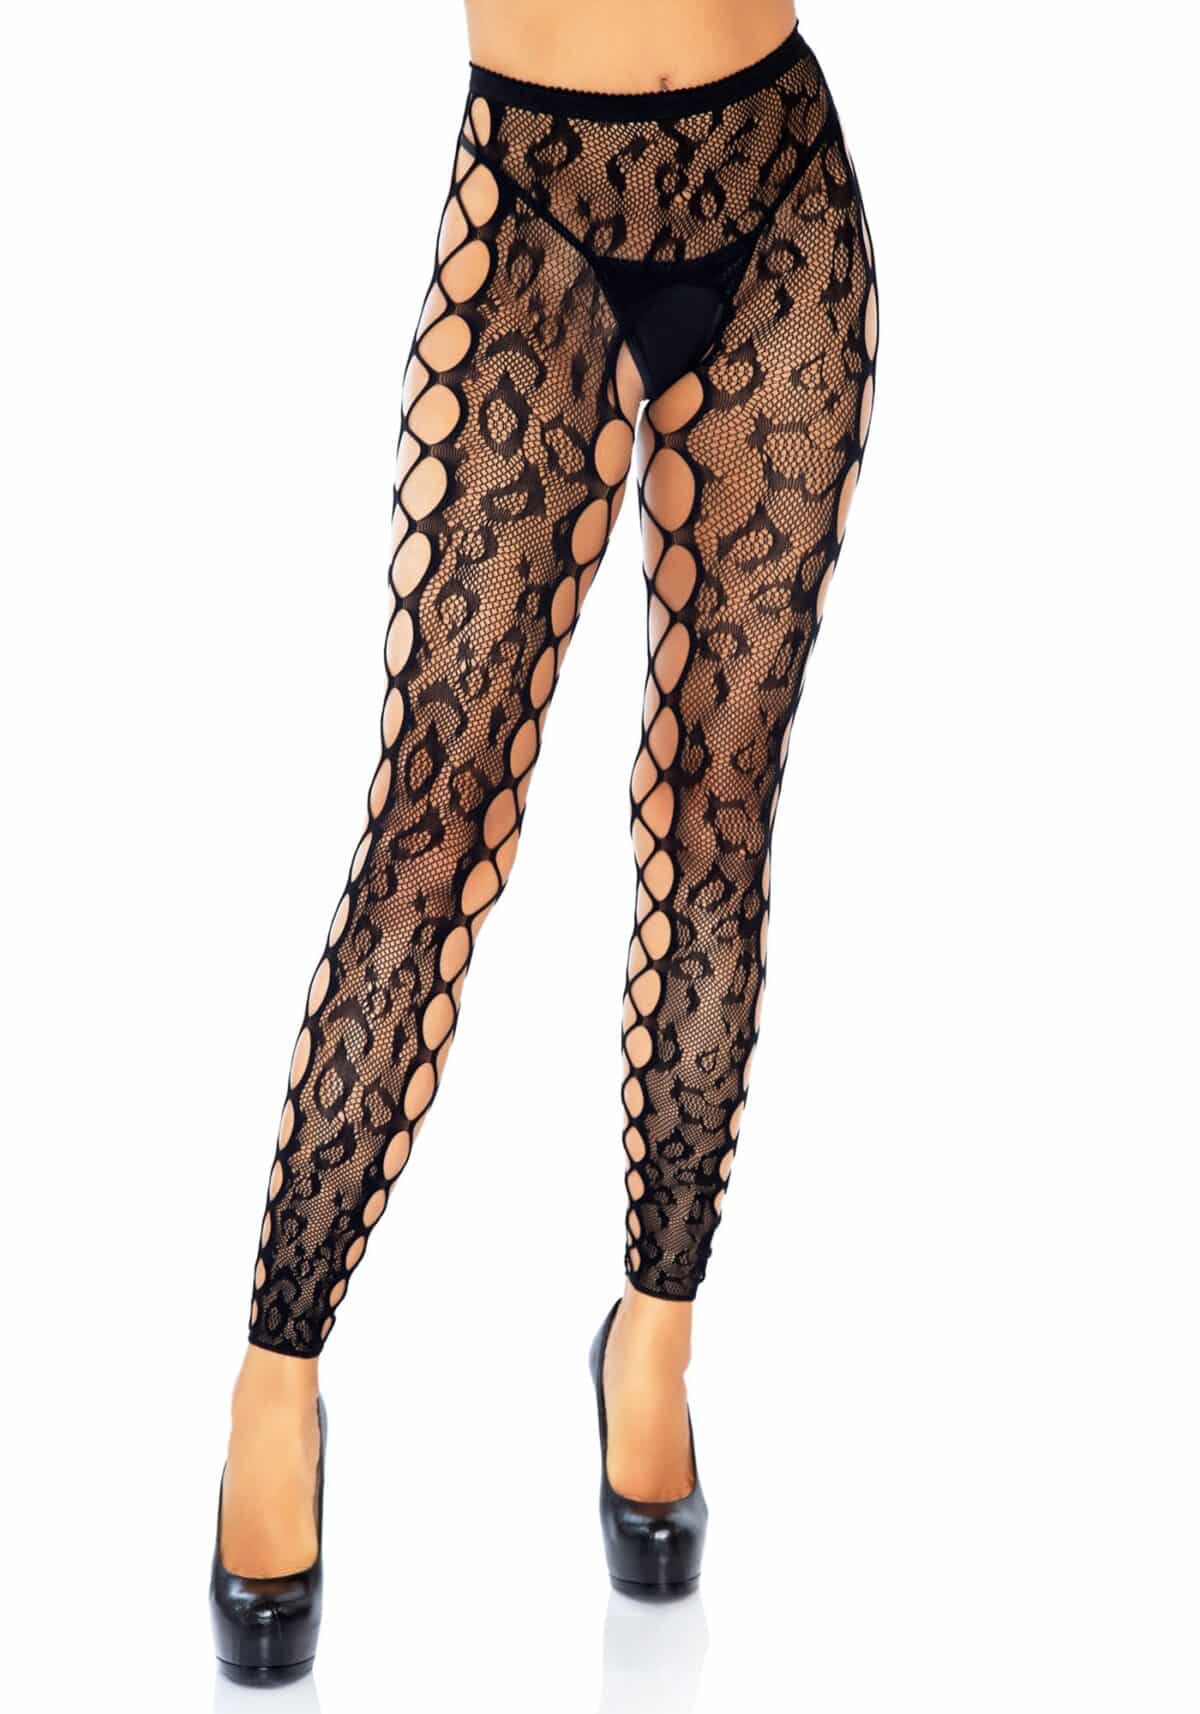 Footless crotchless tights κολάν δίχτυ